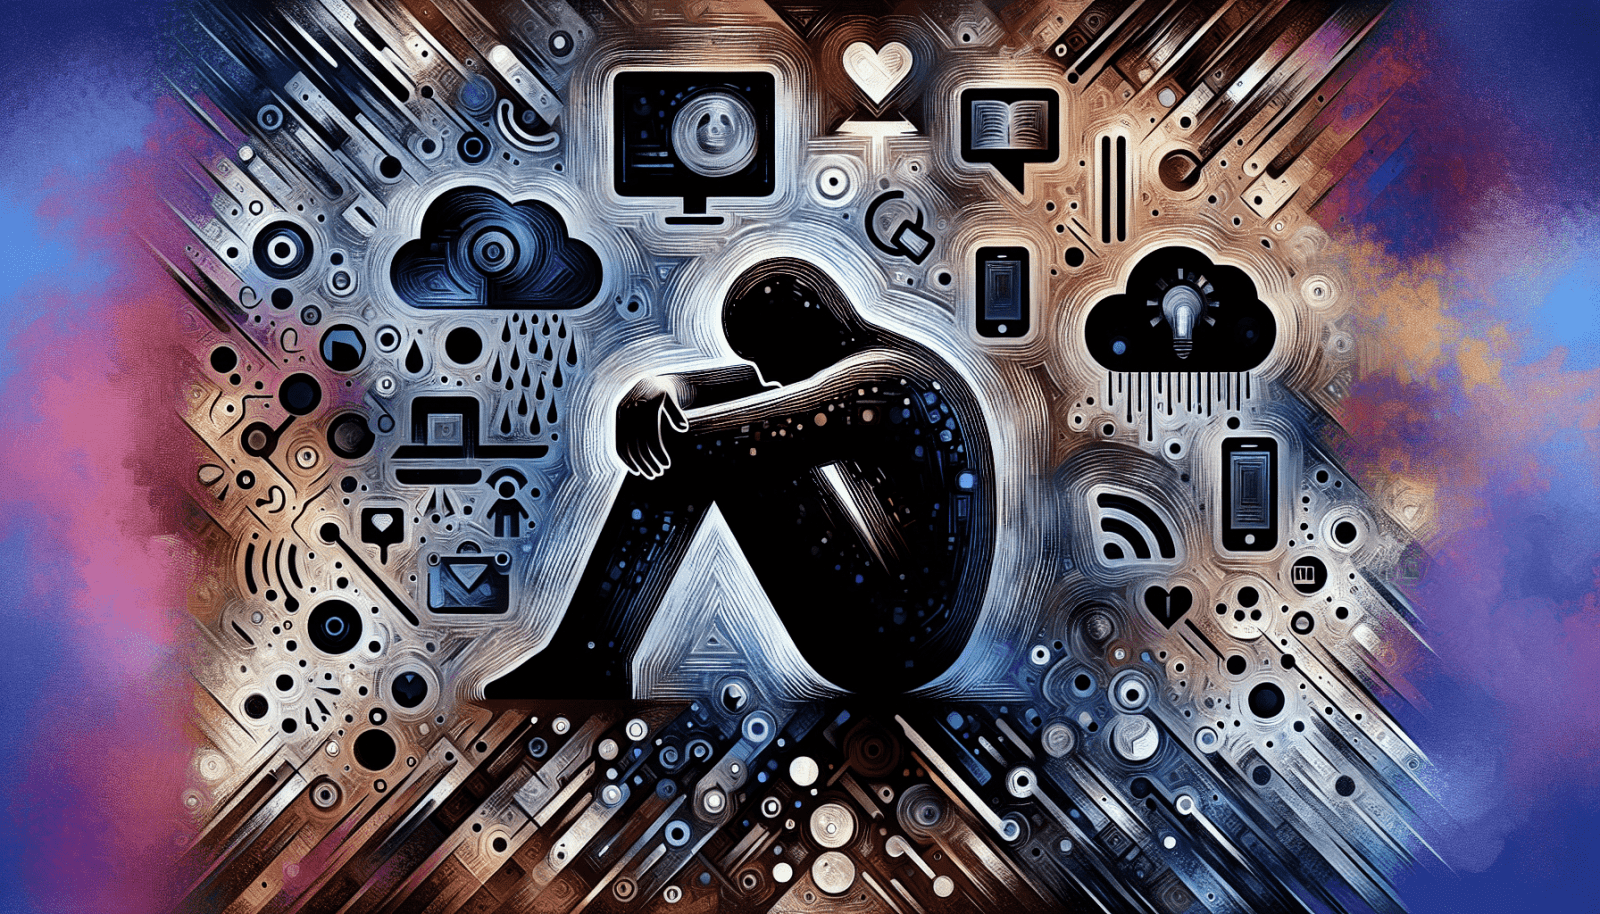 Digital artwork depicting a human silhouette sitting down with head resting on hand surrounded by an intricate array of tech and social media related symbols and icons integrated into a colorful abstract background.